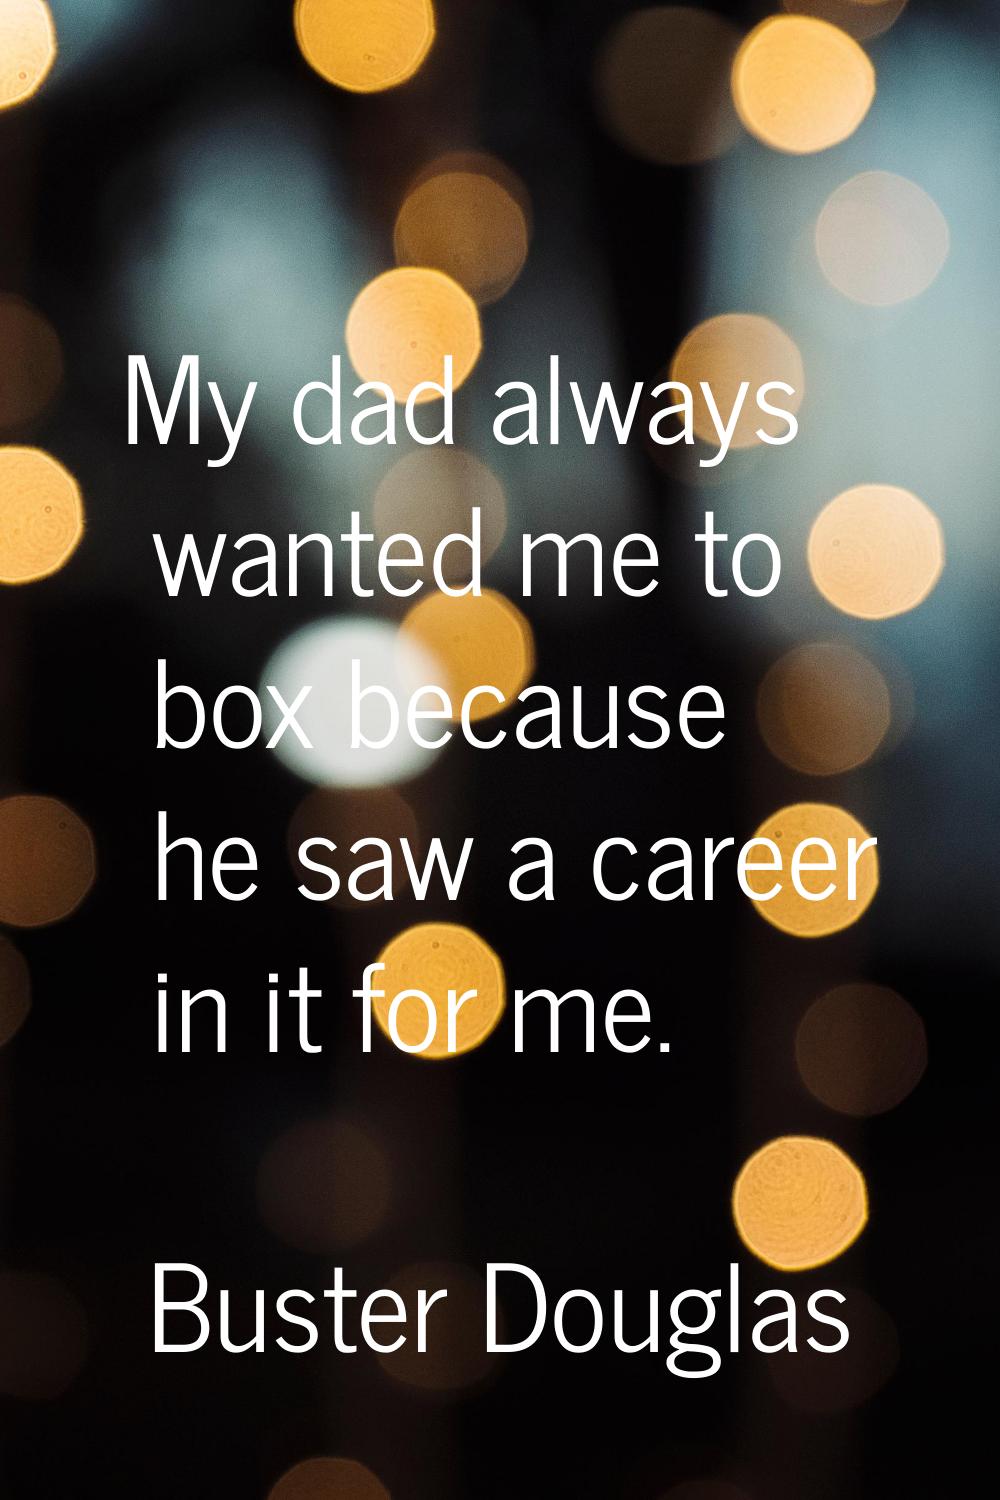 My dad always wanted me to box because he saw a career in it for me.